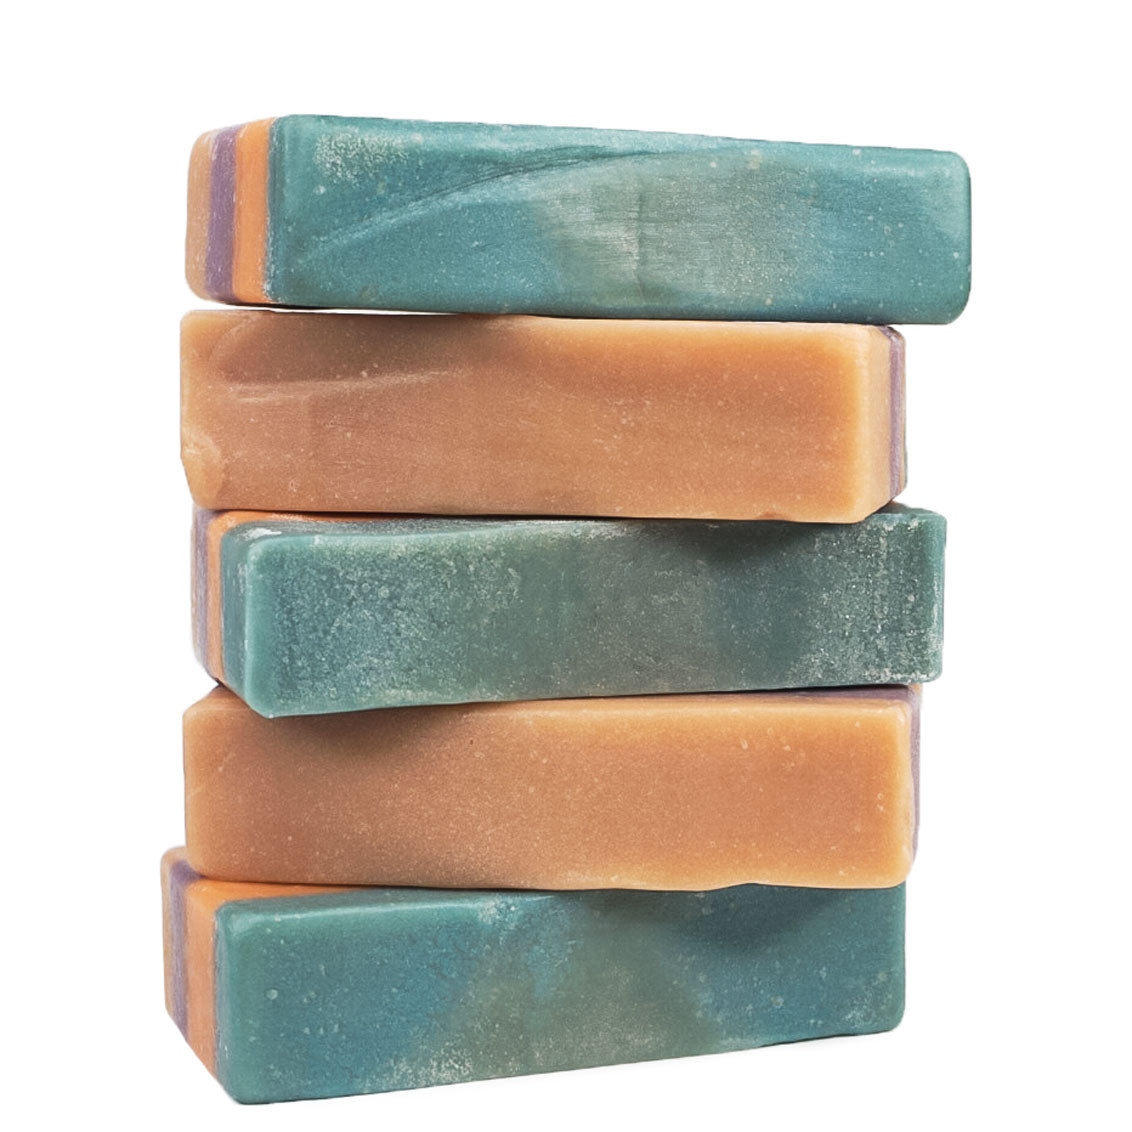 stalk of colorful soap bars blue green and orange